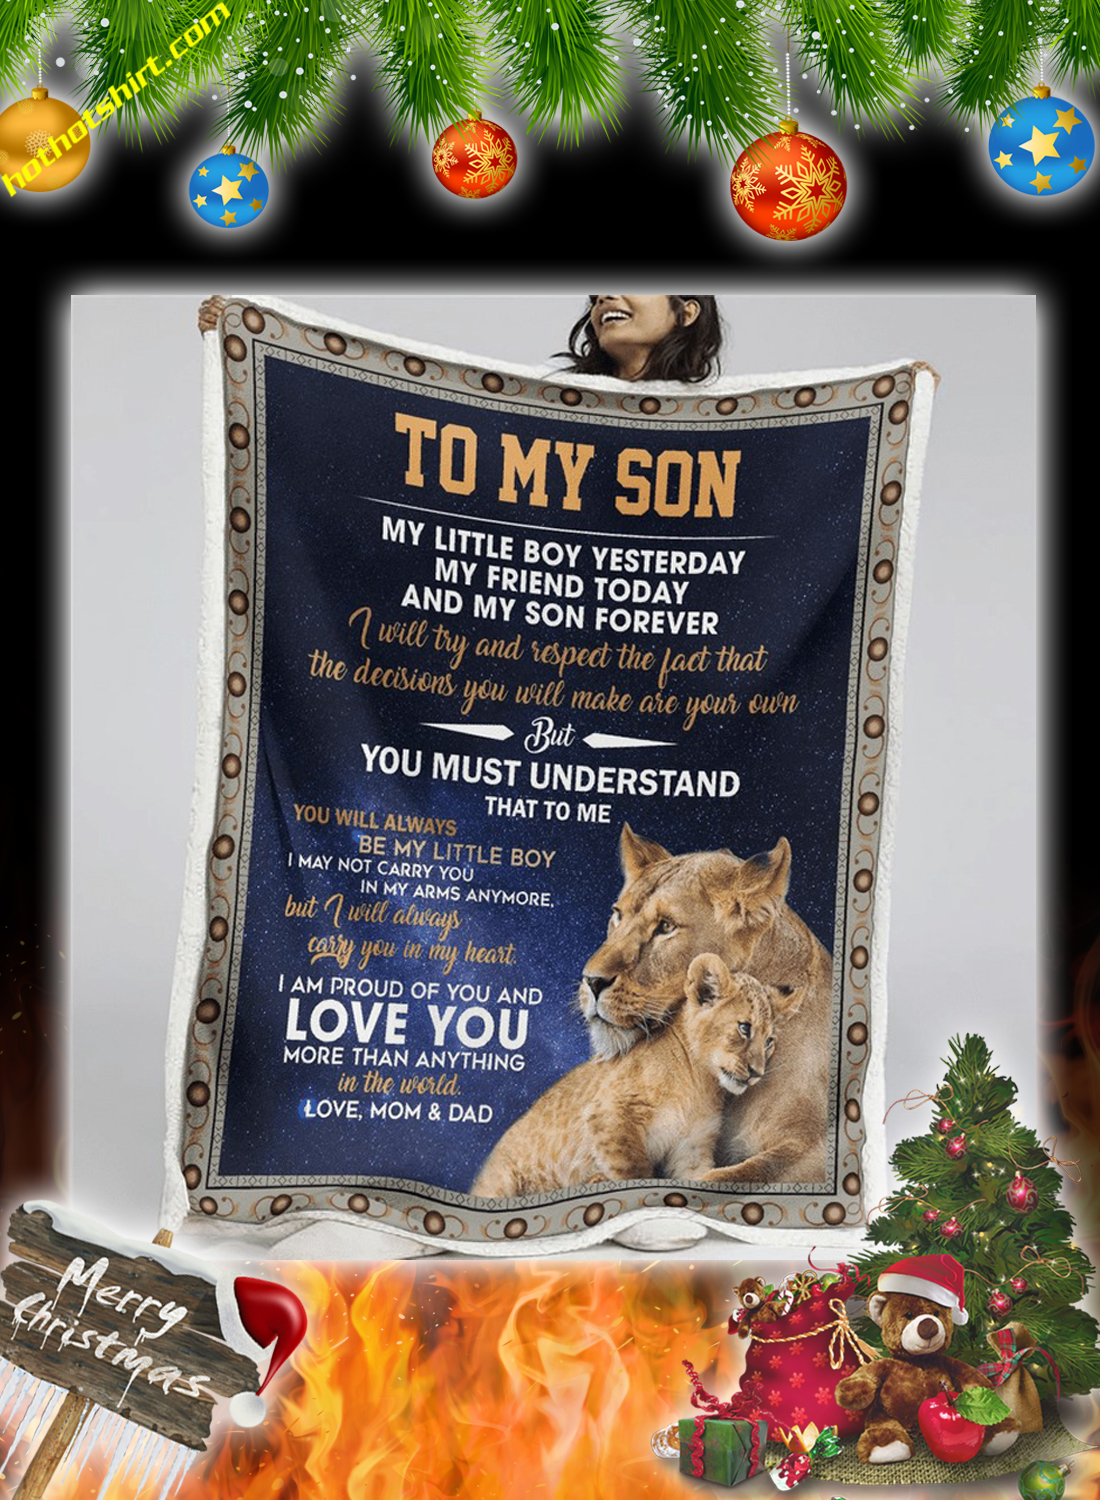 Lion To my son love mom and dad quilt 1